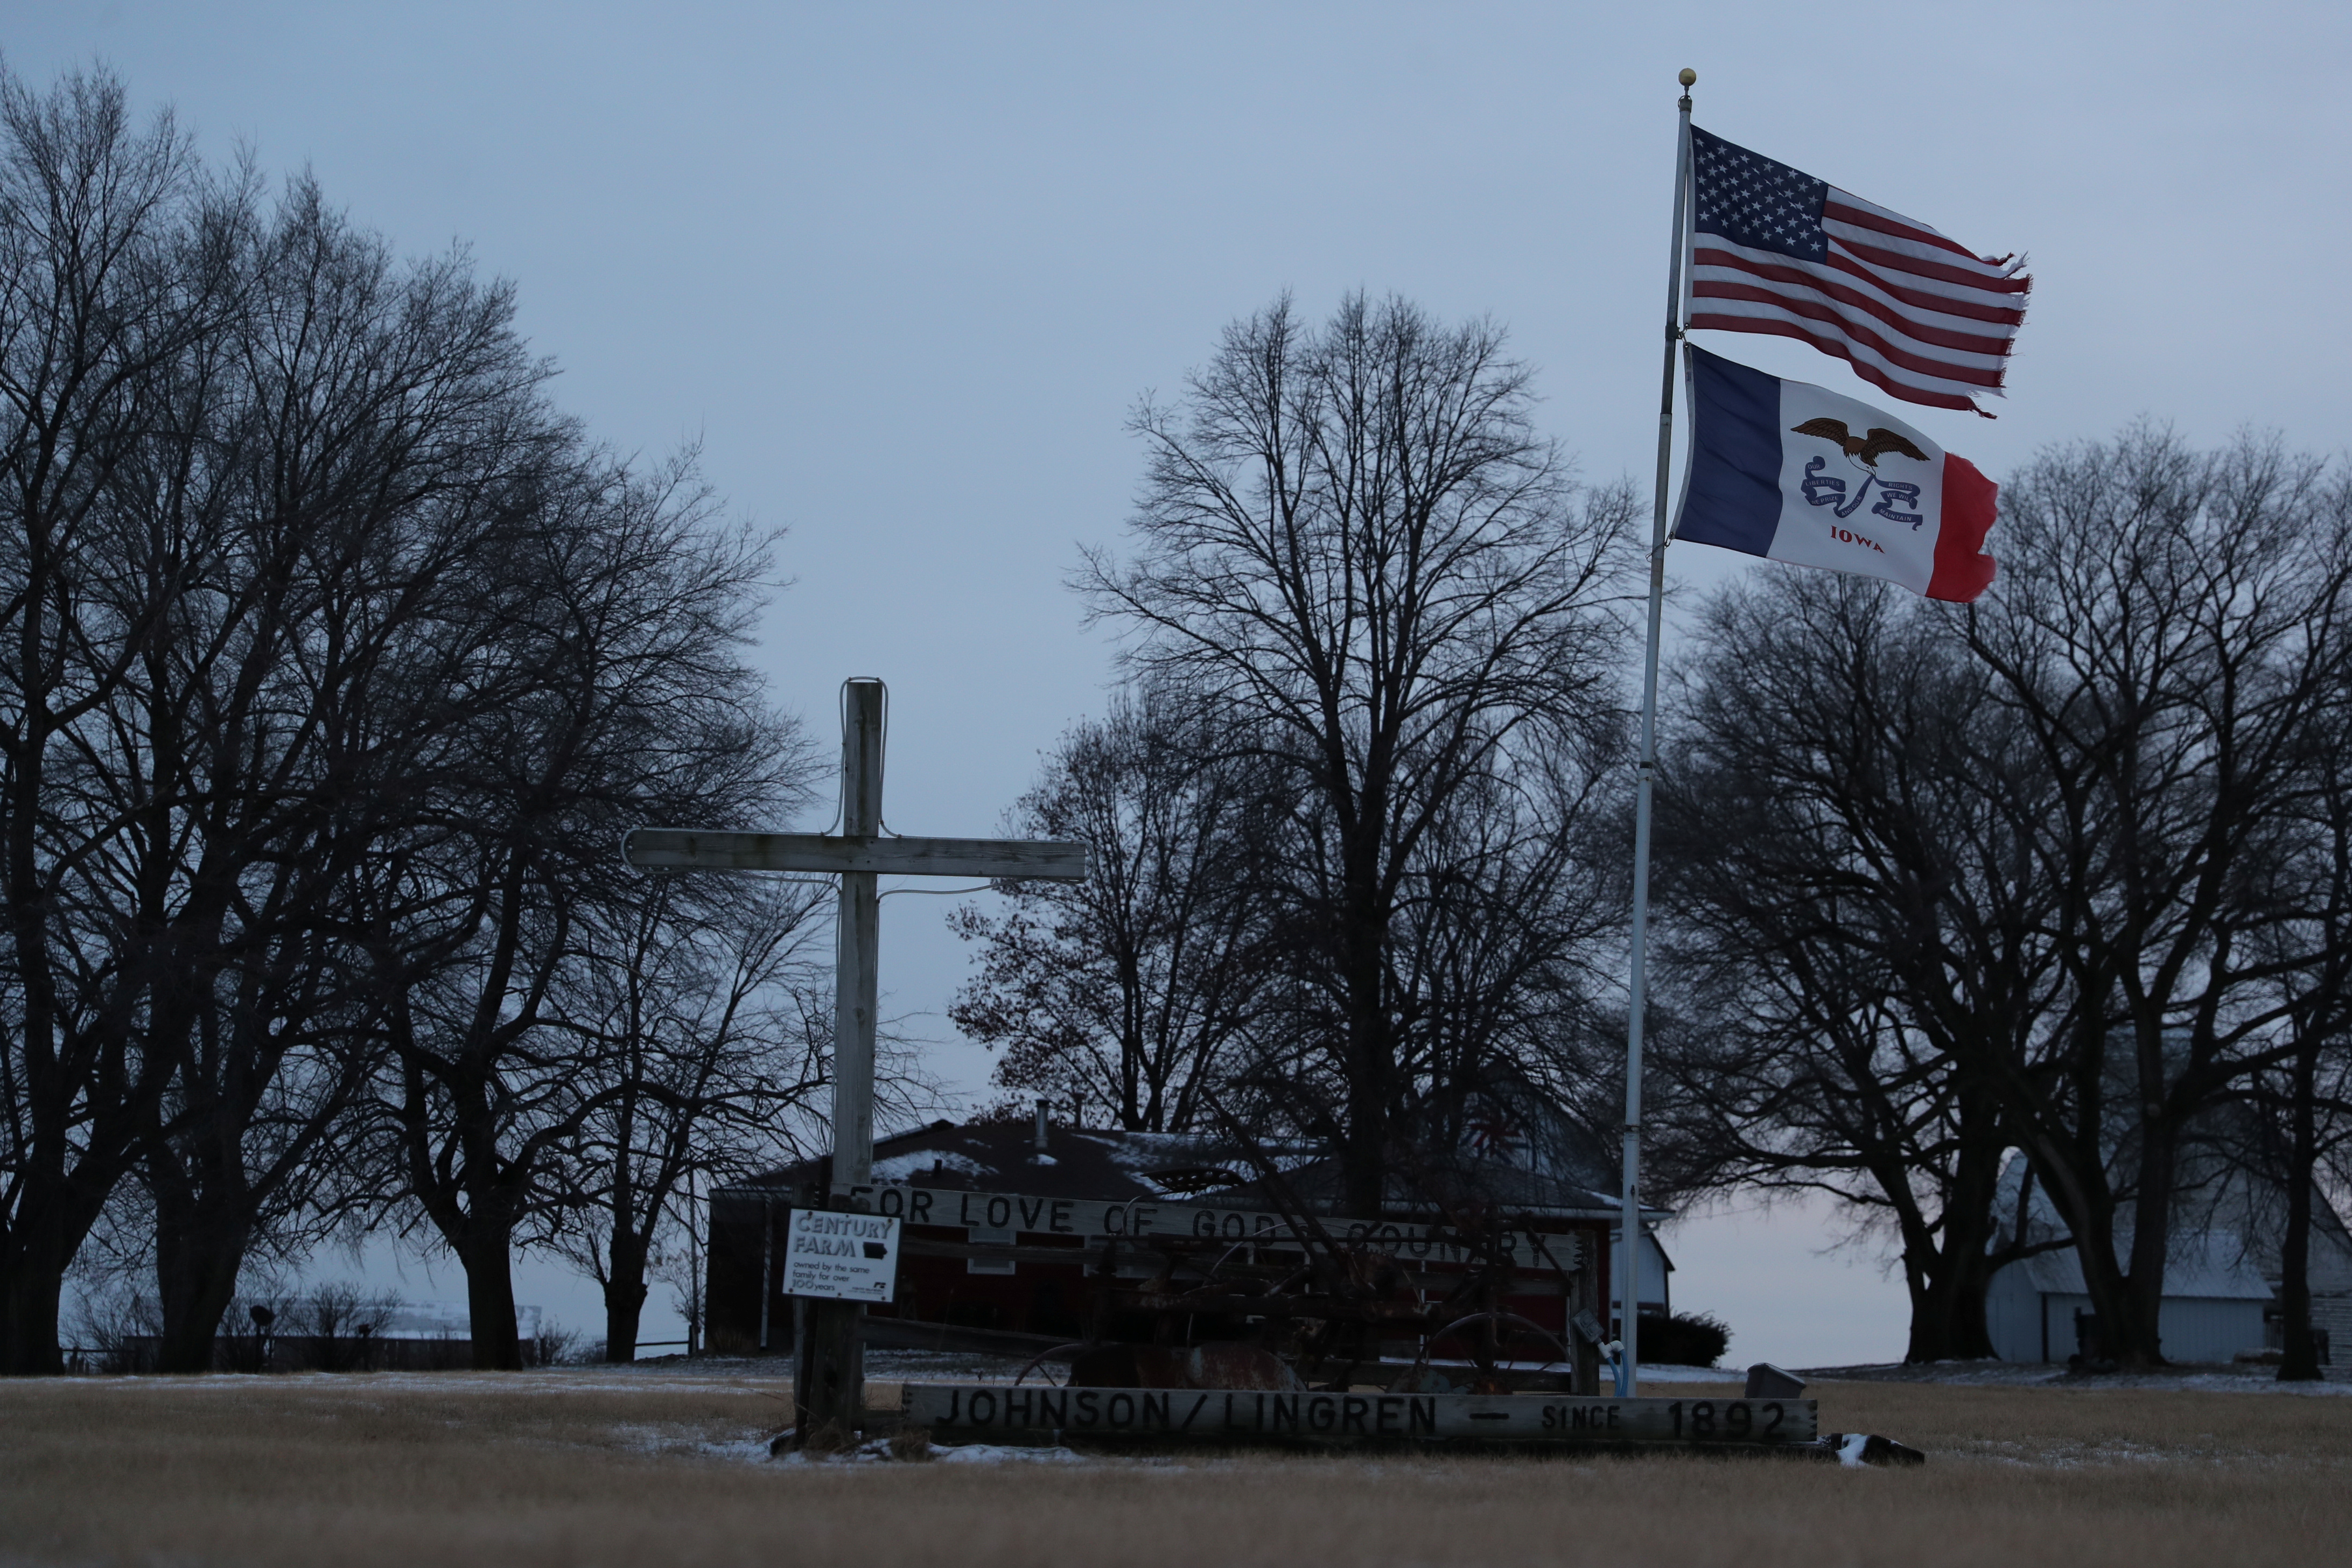 A cross and flags are seen near Ogden Adel